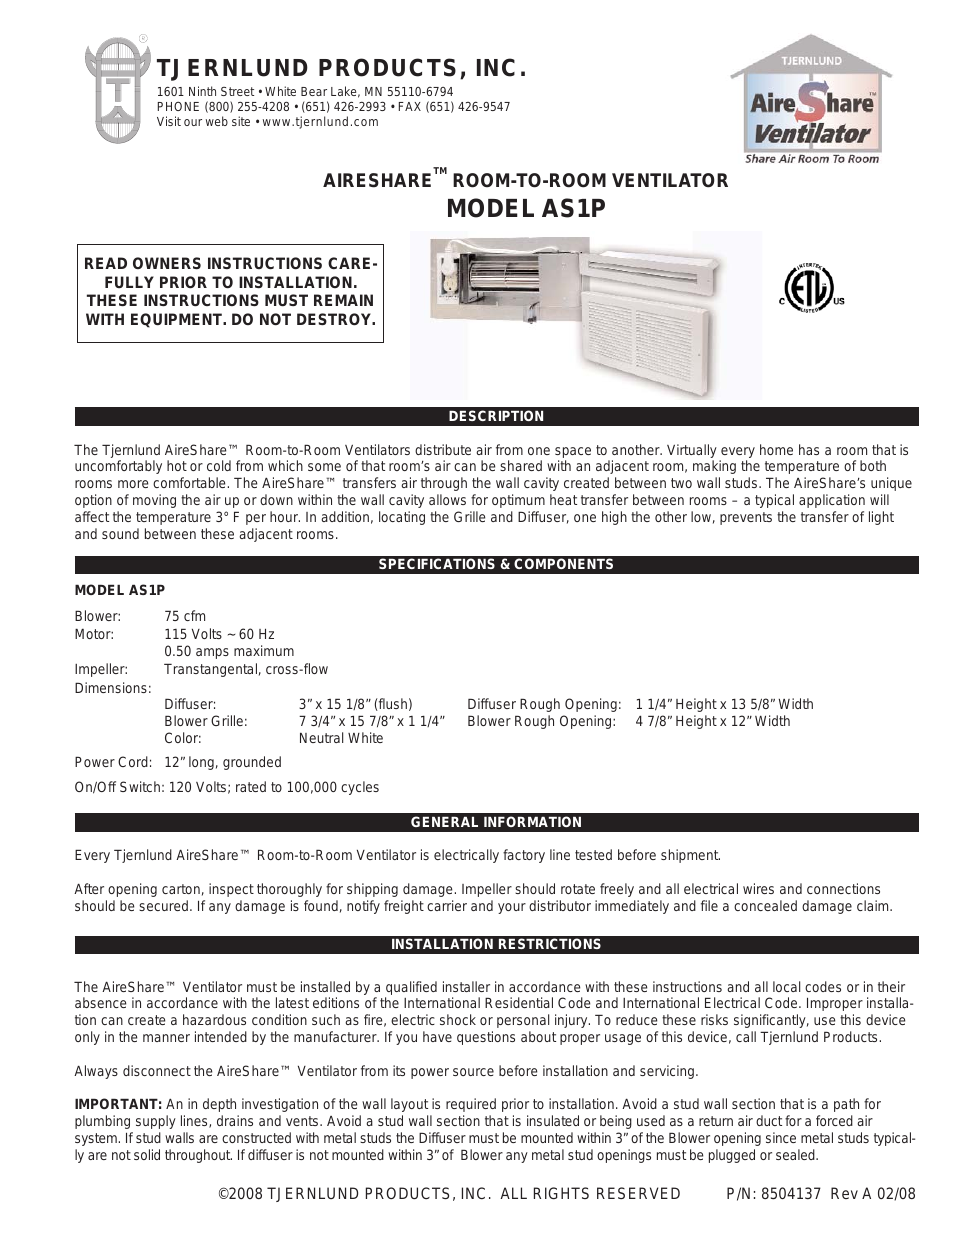 AS1P AireShare Room-to-Room Ventilator Rev A 02/08 8504137